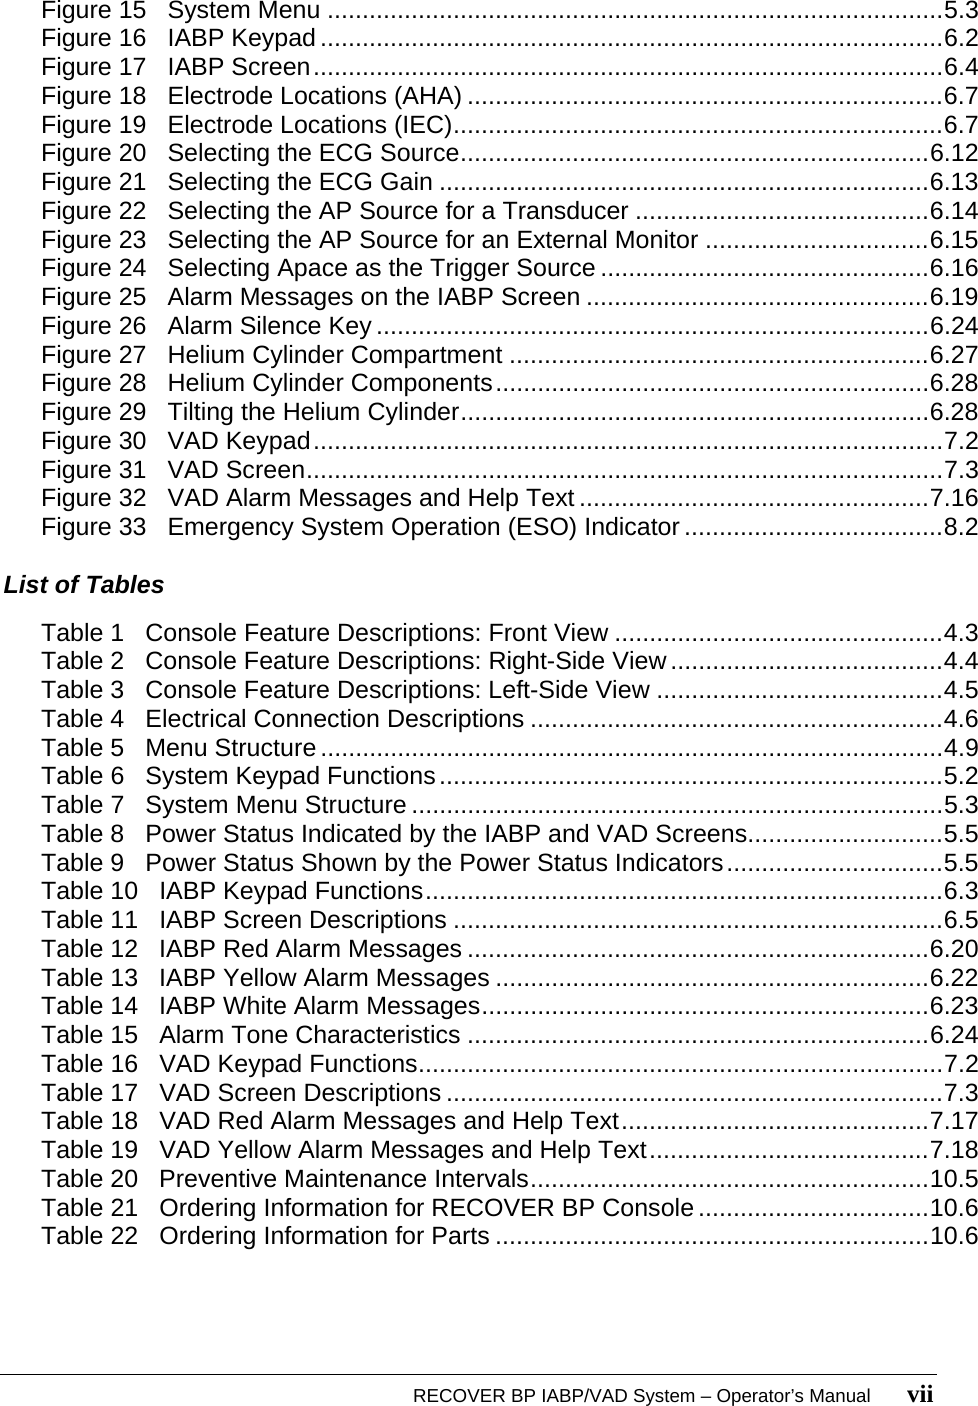   RECOVER BP IABP/VAD System – Operator’s Manual       vii Figure 15   System Menu ........................................................................................5.3 Figure 16   IABP Keypad .........................................................................................6.2 Figure 17   IABP Screen..........................................................................................6.4 Figure 18   Electrode Locations (AHA) ....................................................................6.7 Figure 19   Electrode Locations (IEC)......................................................................6.7 Figure 20   Selecting the ECG Source...................................................................6.12 Figure 21   Selecting the ECG Gain ......................................................................6.13 Figure 22   Selecting the AP Source for a Transducer ..........................................6.14 Figure 23   Selecting the AP Source for an External Monitor ................................6.15 Figure 24   Selecting Apace as the Trigger Source ...............................................6.16 Figure 25   Alarm Messages on the IABP Screen .................................................6.19 Figure 26   Alarm Silence Key ...............................................................................6.24 Figure 27   Helium Cylinder Compartment ............................................................6.27 Figure 28   Helium Cylinder Components..............................................................6.28 Figure 29   Tilting the Helium Cylinder...................................................................6.28 Figure 30   VAD Keypad..........................................................................................7.2 Figure 31   VAD Screen...........................................................................................7.3 Figure 32   VAD Alarm Messages and Help Text ..................................................7.16 Figure 33   Emergency System Operation (ESO) Indicator .....................................8.2  List of Tables  Table 1   Console Feature Descriptions: Front View ...............................................4.3 Table 2   Console Feature Descriptions: Right-Side View.......................................4.4 Table 3   Console Feature Descriptions: Left-Side View .........................................4.5 Table 4   Electrical Connection Descriptions ...........................................................4.6 Table 5   Menu Structure .........................................................................................4.9 Table 6   System Keypad Functions........................................................................5.2 Table 7   System Menu Structure ............................................................................5.3 Table 8   Power Status Indicated by the IABP and VAD Screens............................5.5 Table 9   Power Status Shown by the Power Status Indicators...............................5.5 Table 10   IABP Keypad Functions..........................................................................6.3 Table 11   IABP Screen Descriptions ......................................................................6.5 Table 12   IABP Red Alarm Messages ..................................................................6.20 Table 13   IABP Yellow Alarm Messages ..............................................................6.22 Table 14   IABP White Alarm Messages................................................................6.23 Table 15   Alarm Tone Characteristics ..................................................................6.24 Table 16   VAD Keypad Functions...........................................................................7.2 Table 17   VAD Screen Descriptions .......................................................................7.3 Table 18   VAD Red Alarm Messages and Help Text............................................7.17 Table 19   VAD Yellow Alarm Messages and Help Text........................................7.18 Table 20   Preventive Maintenance Intervals.........................................................10.5 Table 21   Ordering Information for RECOVER BP Console .................................10.6 Table 22   Ordering Information for Parts ..............................................................10.6  